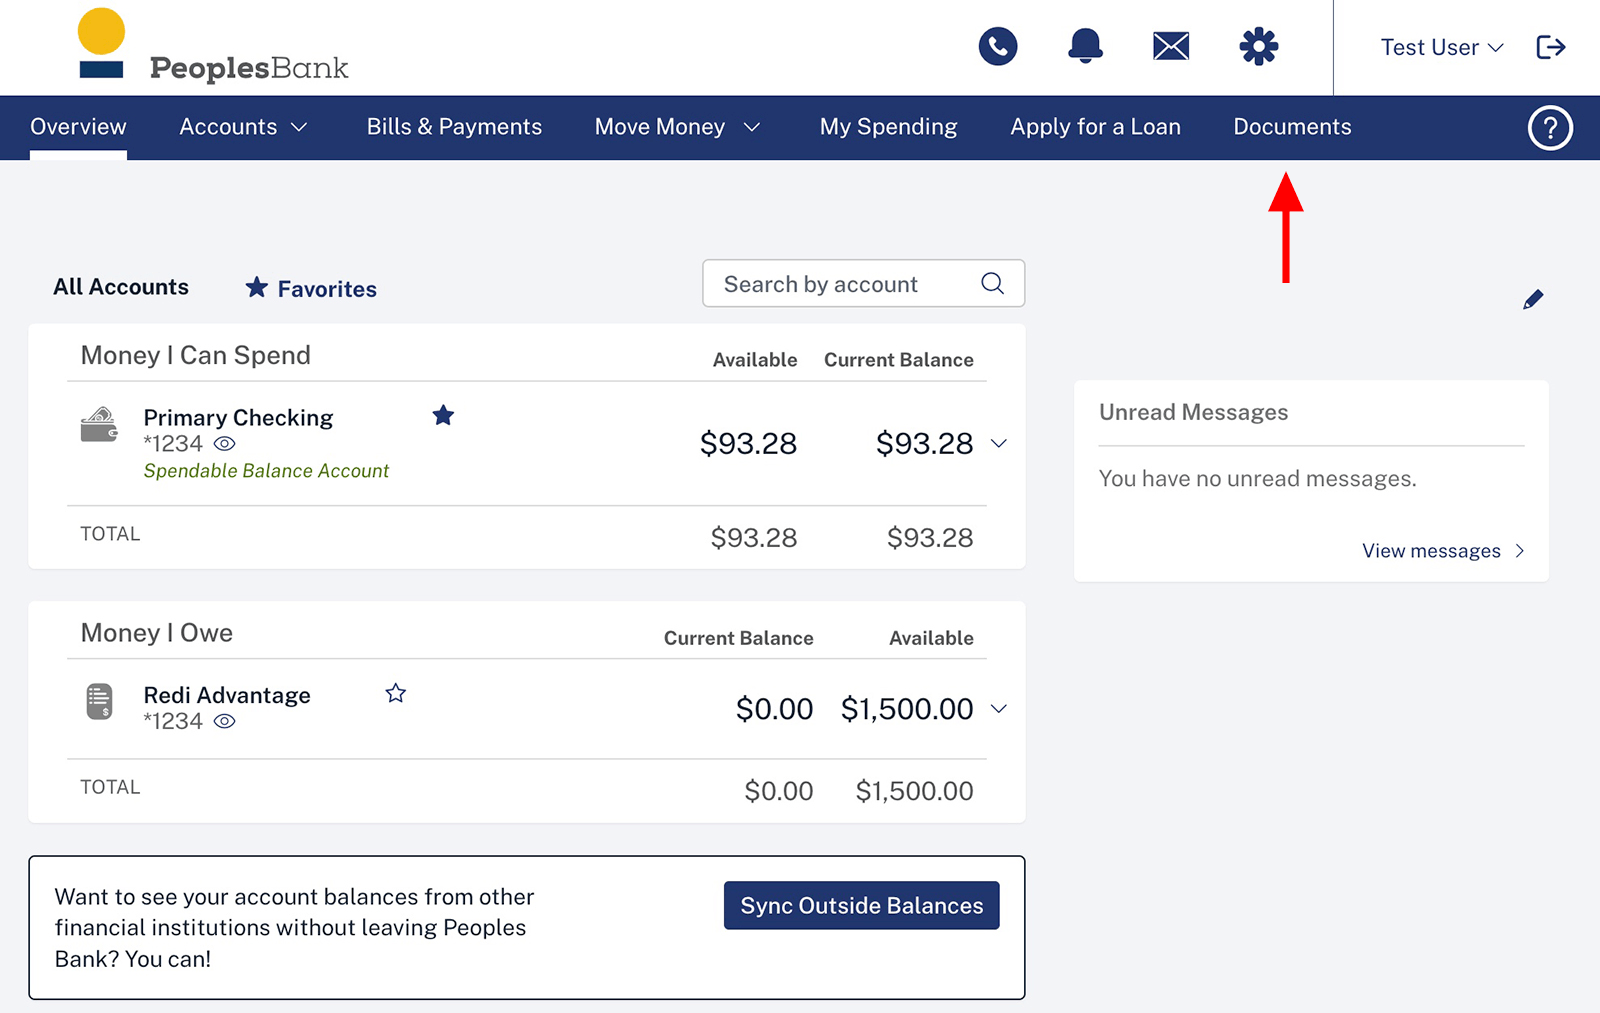 Online banking home screen showing Documents tab in menu bar